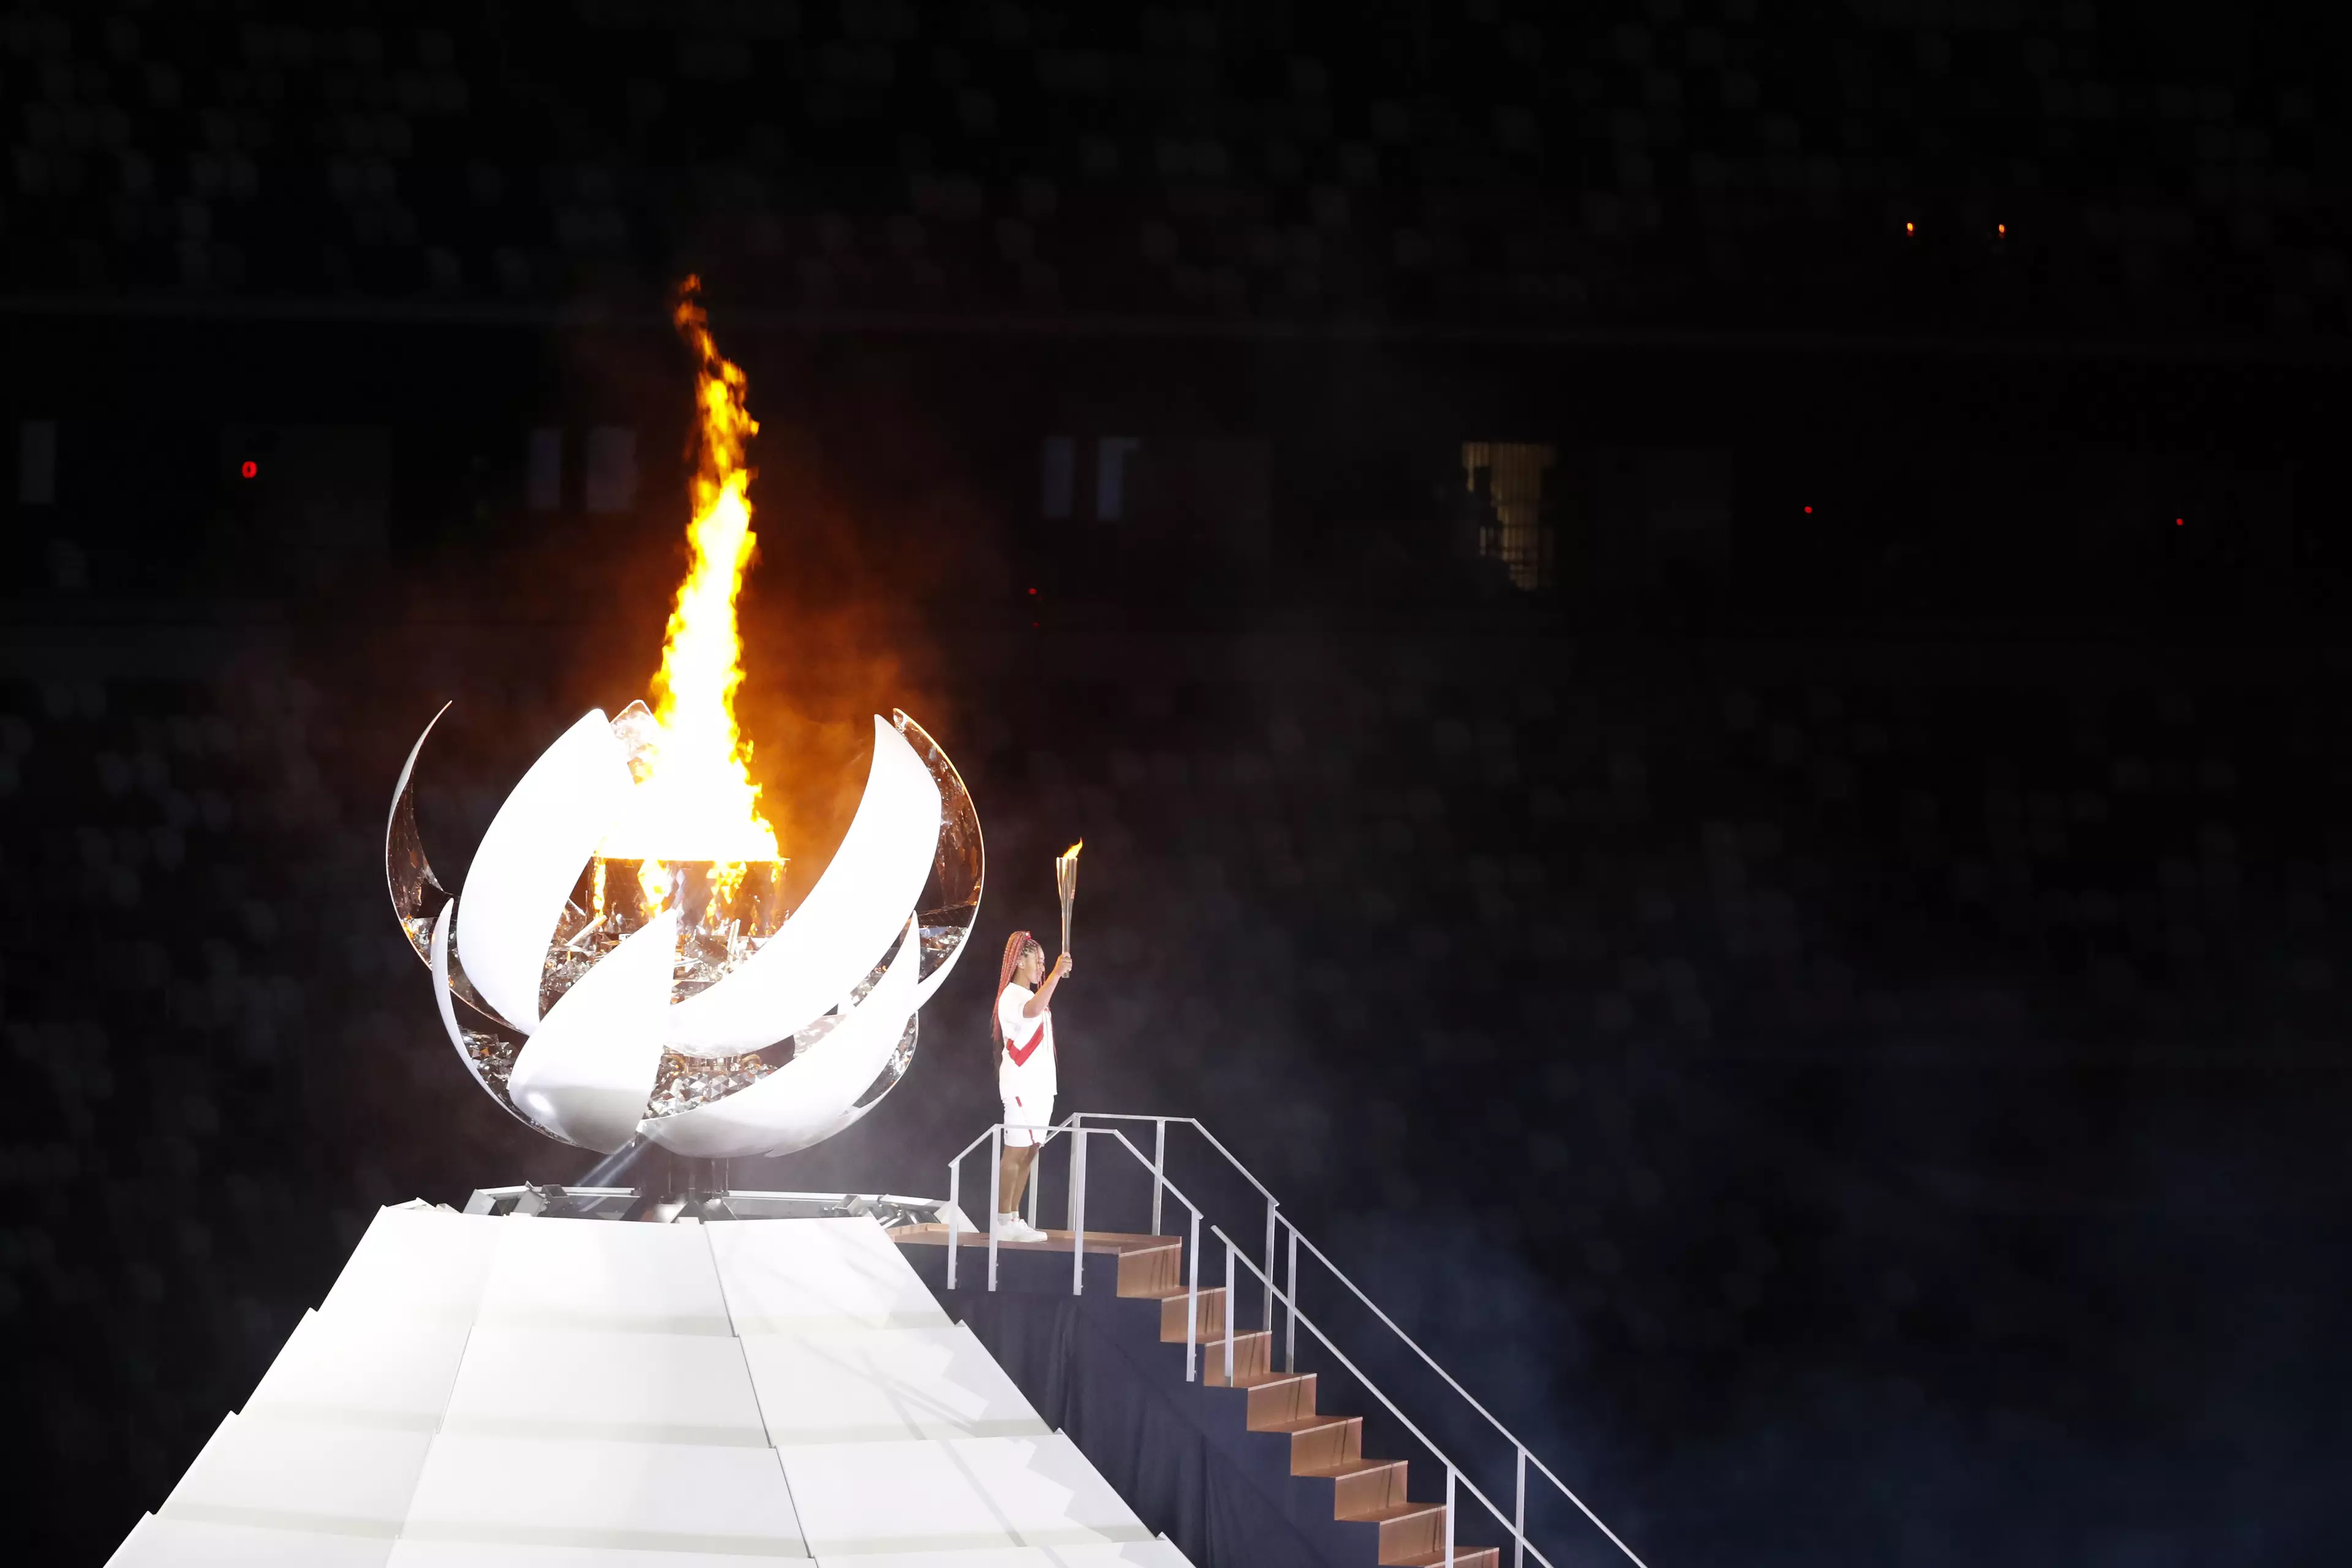 Naomi Osaka, tennis player for Japan, lights the Olympic flame at the Opening Ceremony.